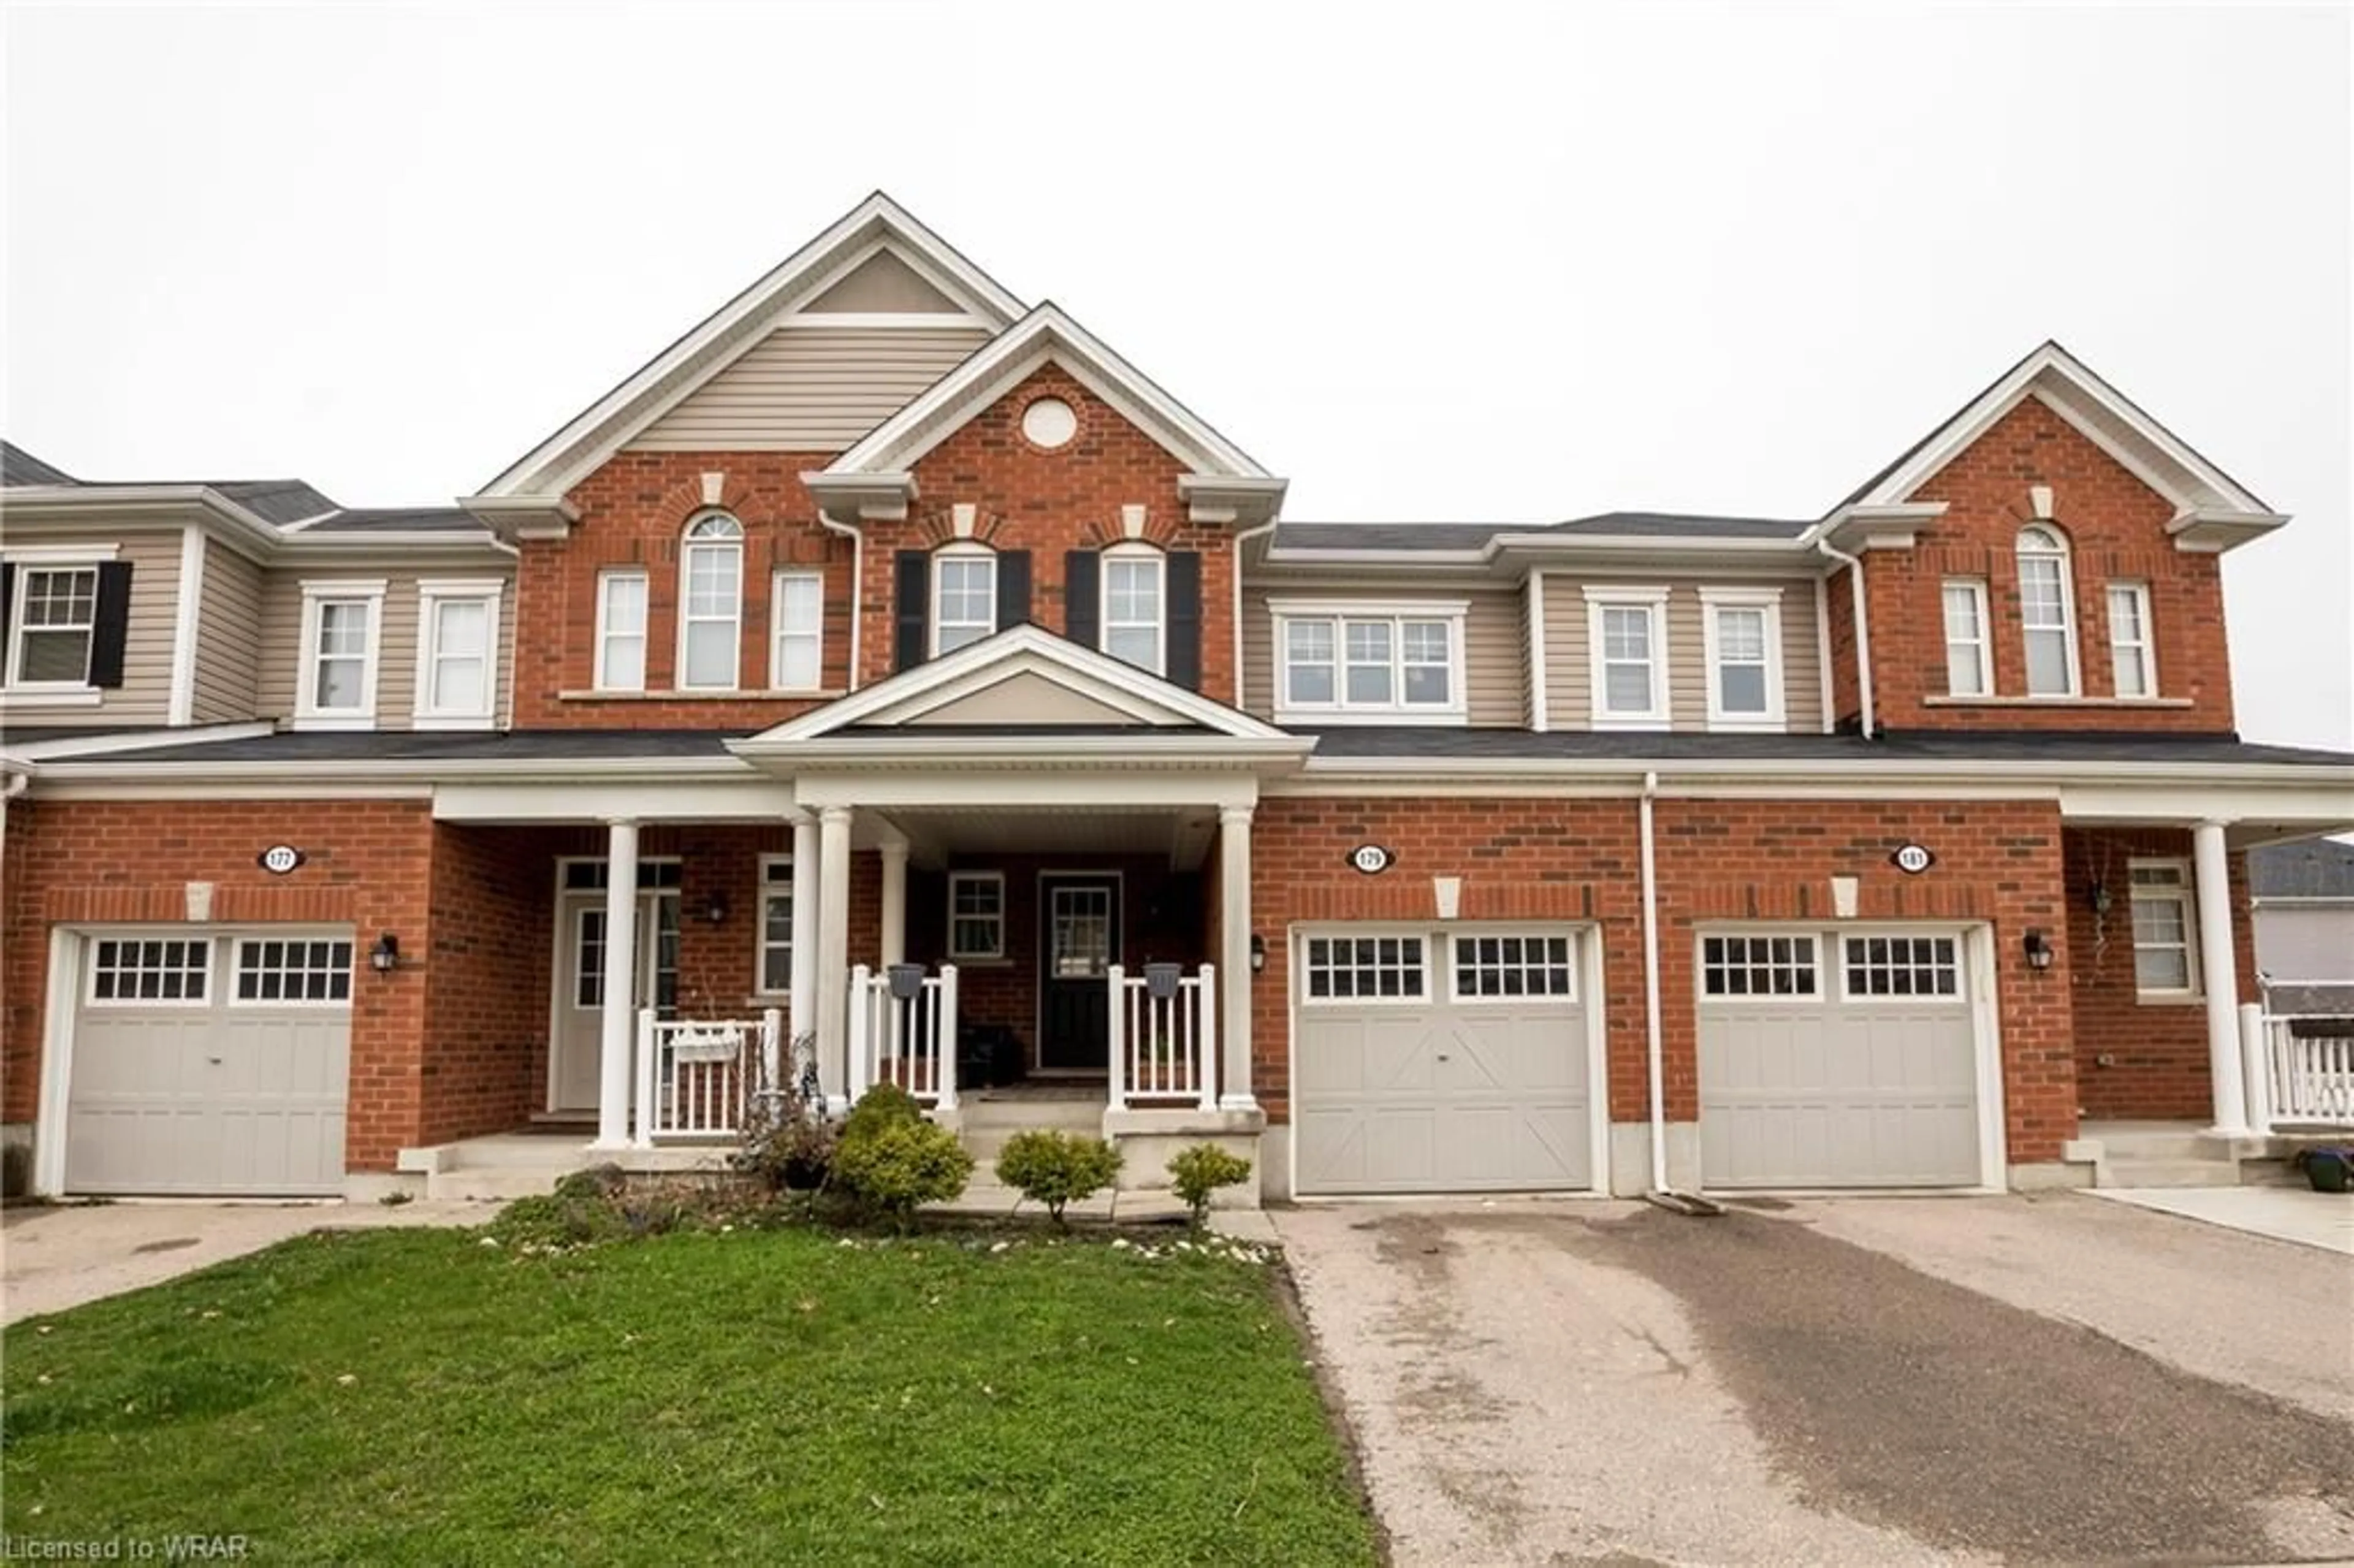 Home with brick exterior material for 179 West Oak Trail, Kitchener Ontario N2R 0J3